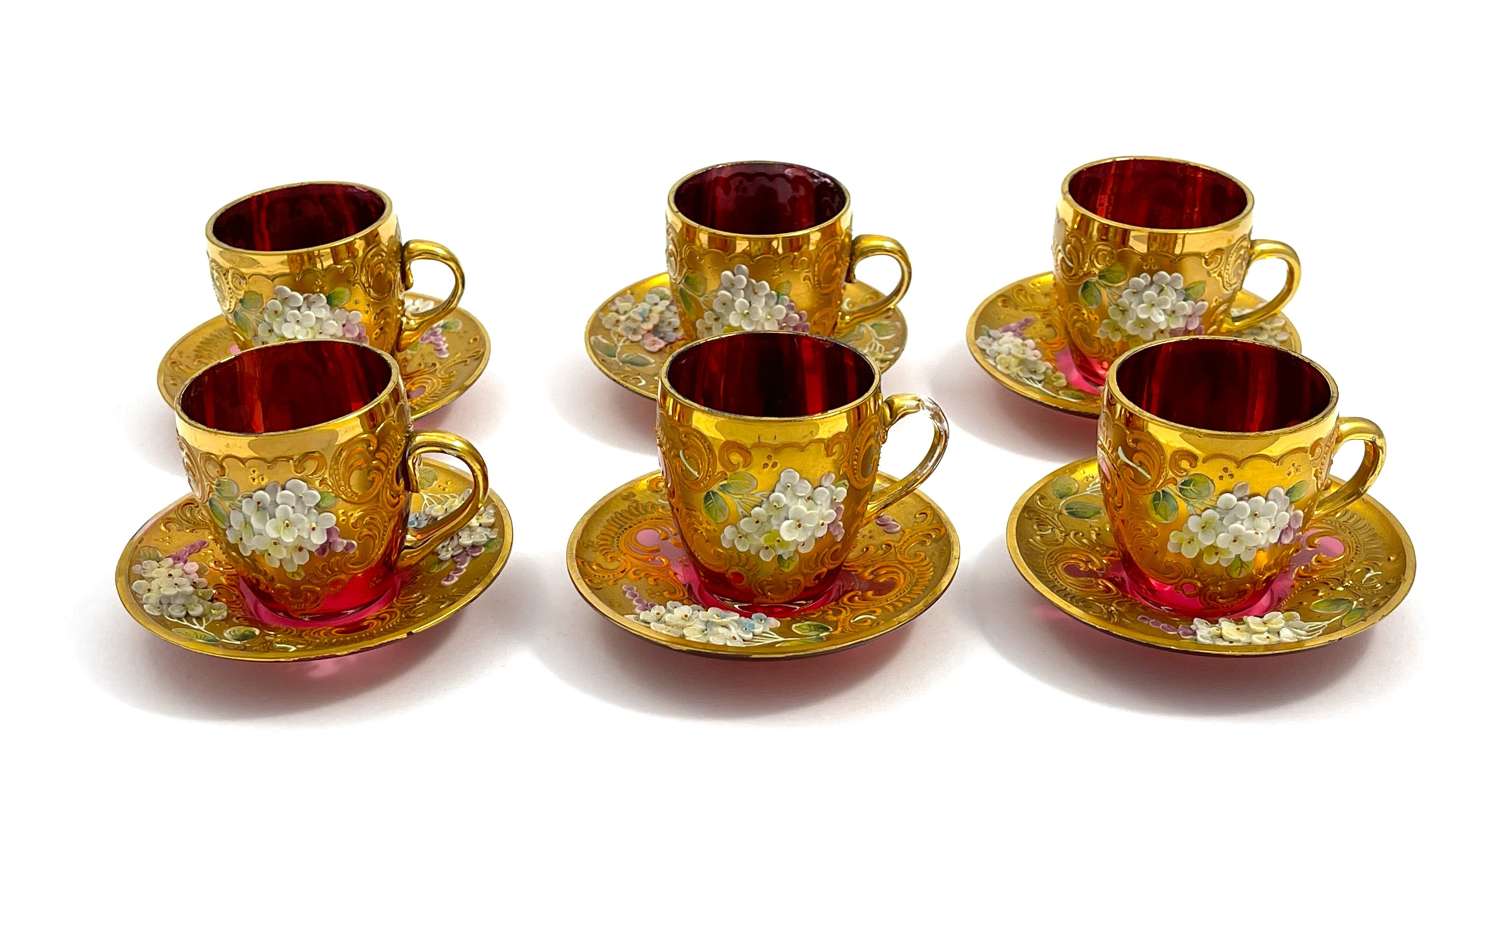 A Set of 6 Antique MOSER Cups and Saucers 